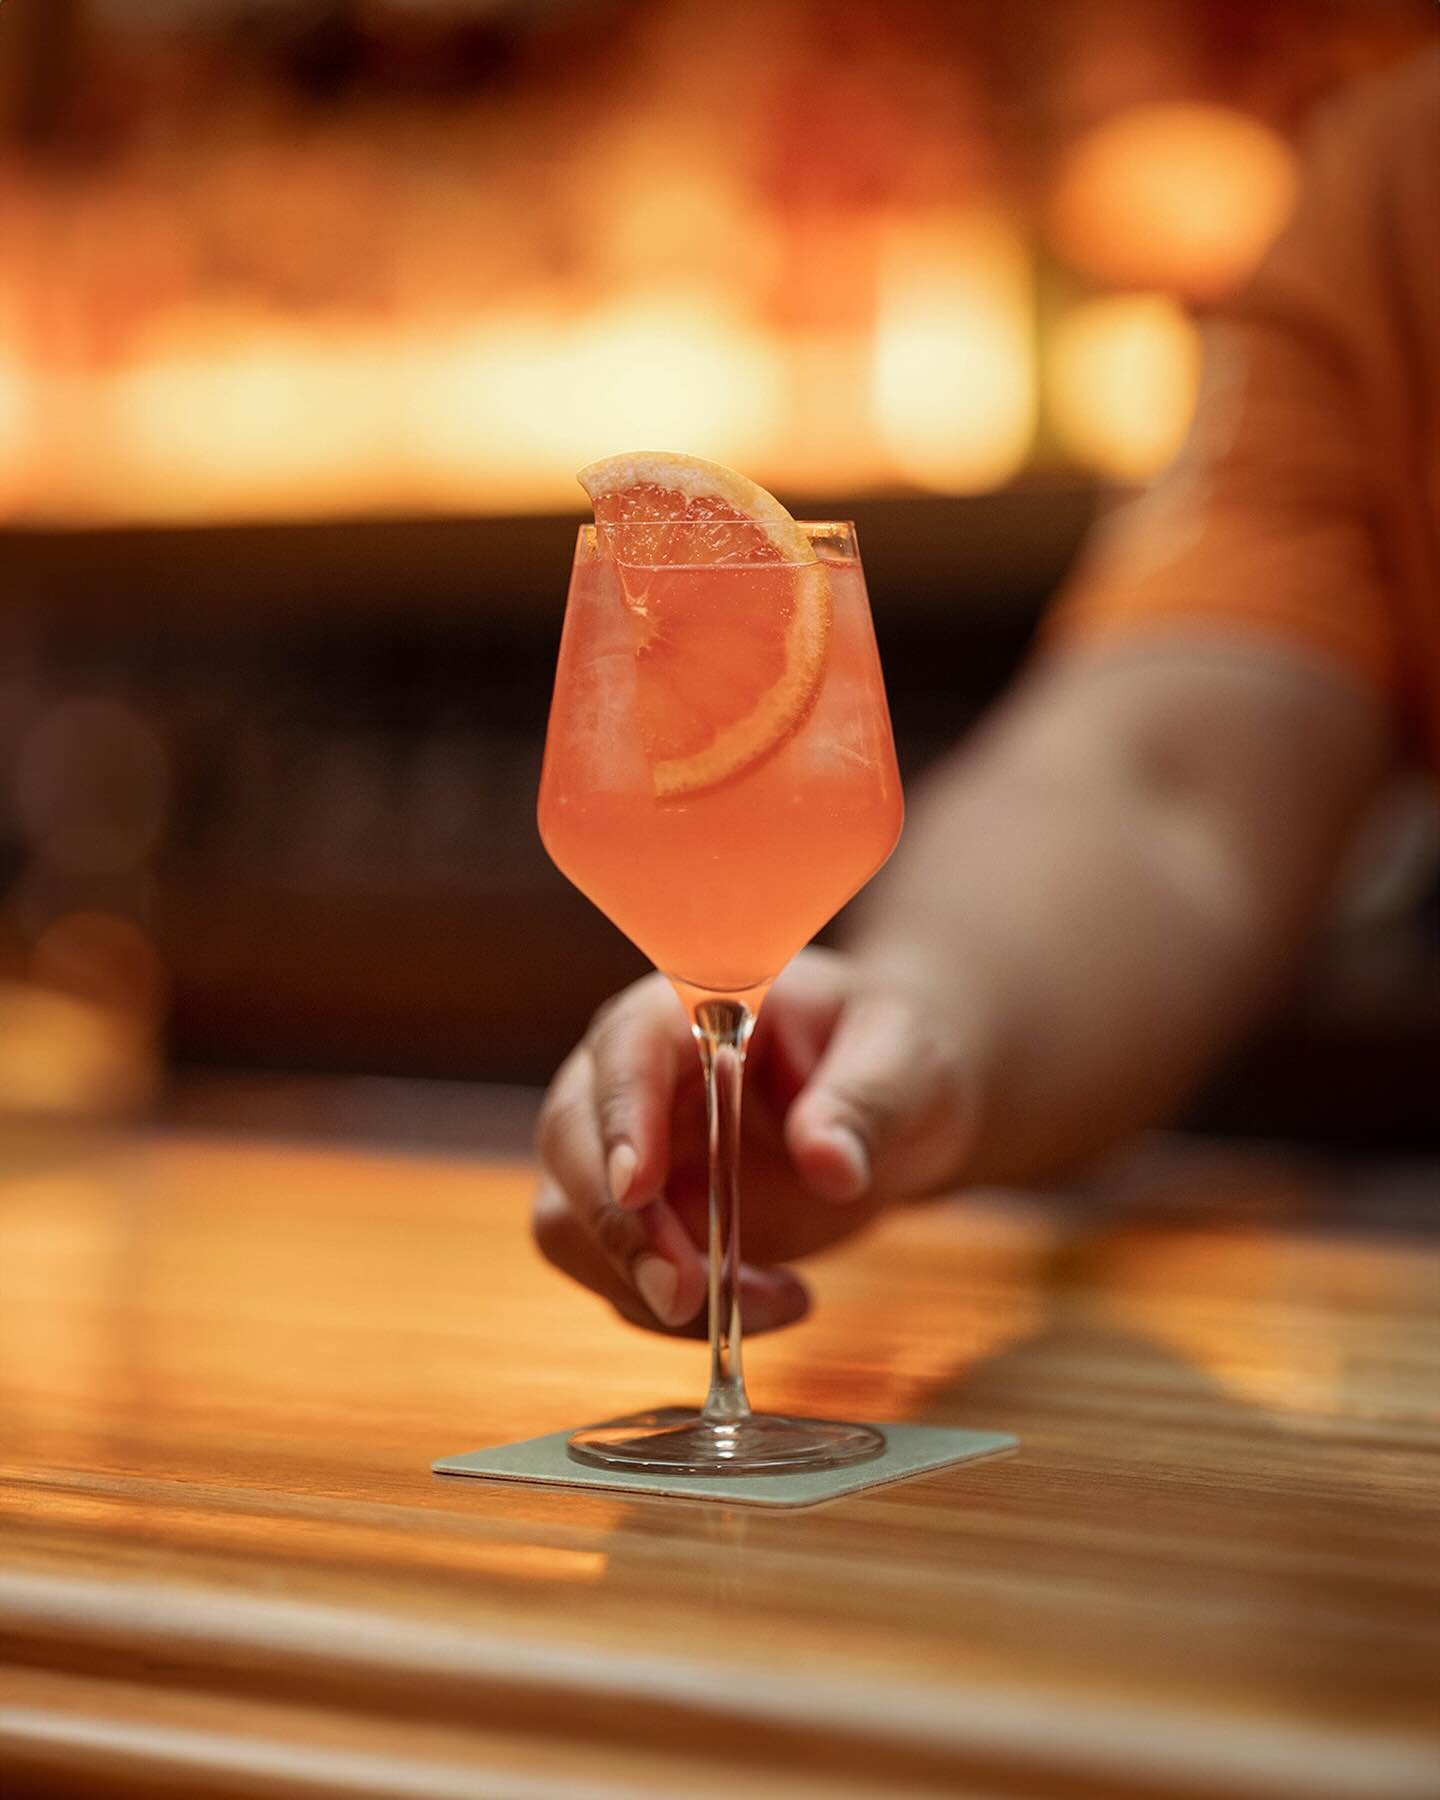 ☀️ All Aboard, Spritz Season has officially arrived. Ketel One Grapefruit &amp; Rose Vodka, Campari, Cacao, and Sparkling Wine. A seasonal special created for longer days and lighter nights - and sure, the grey ones, too.